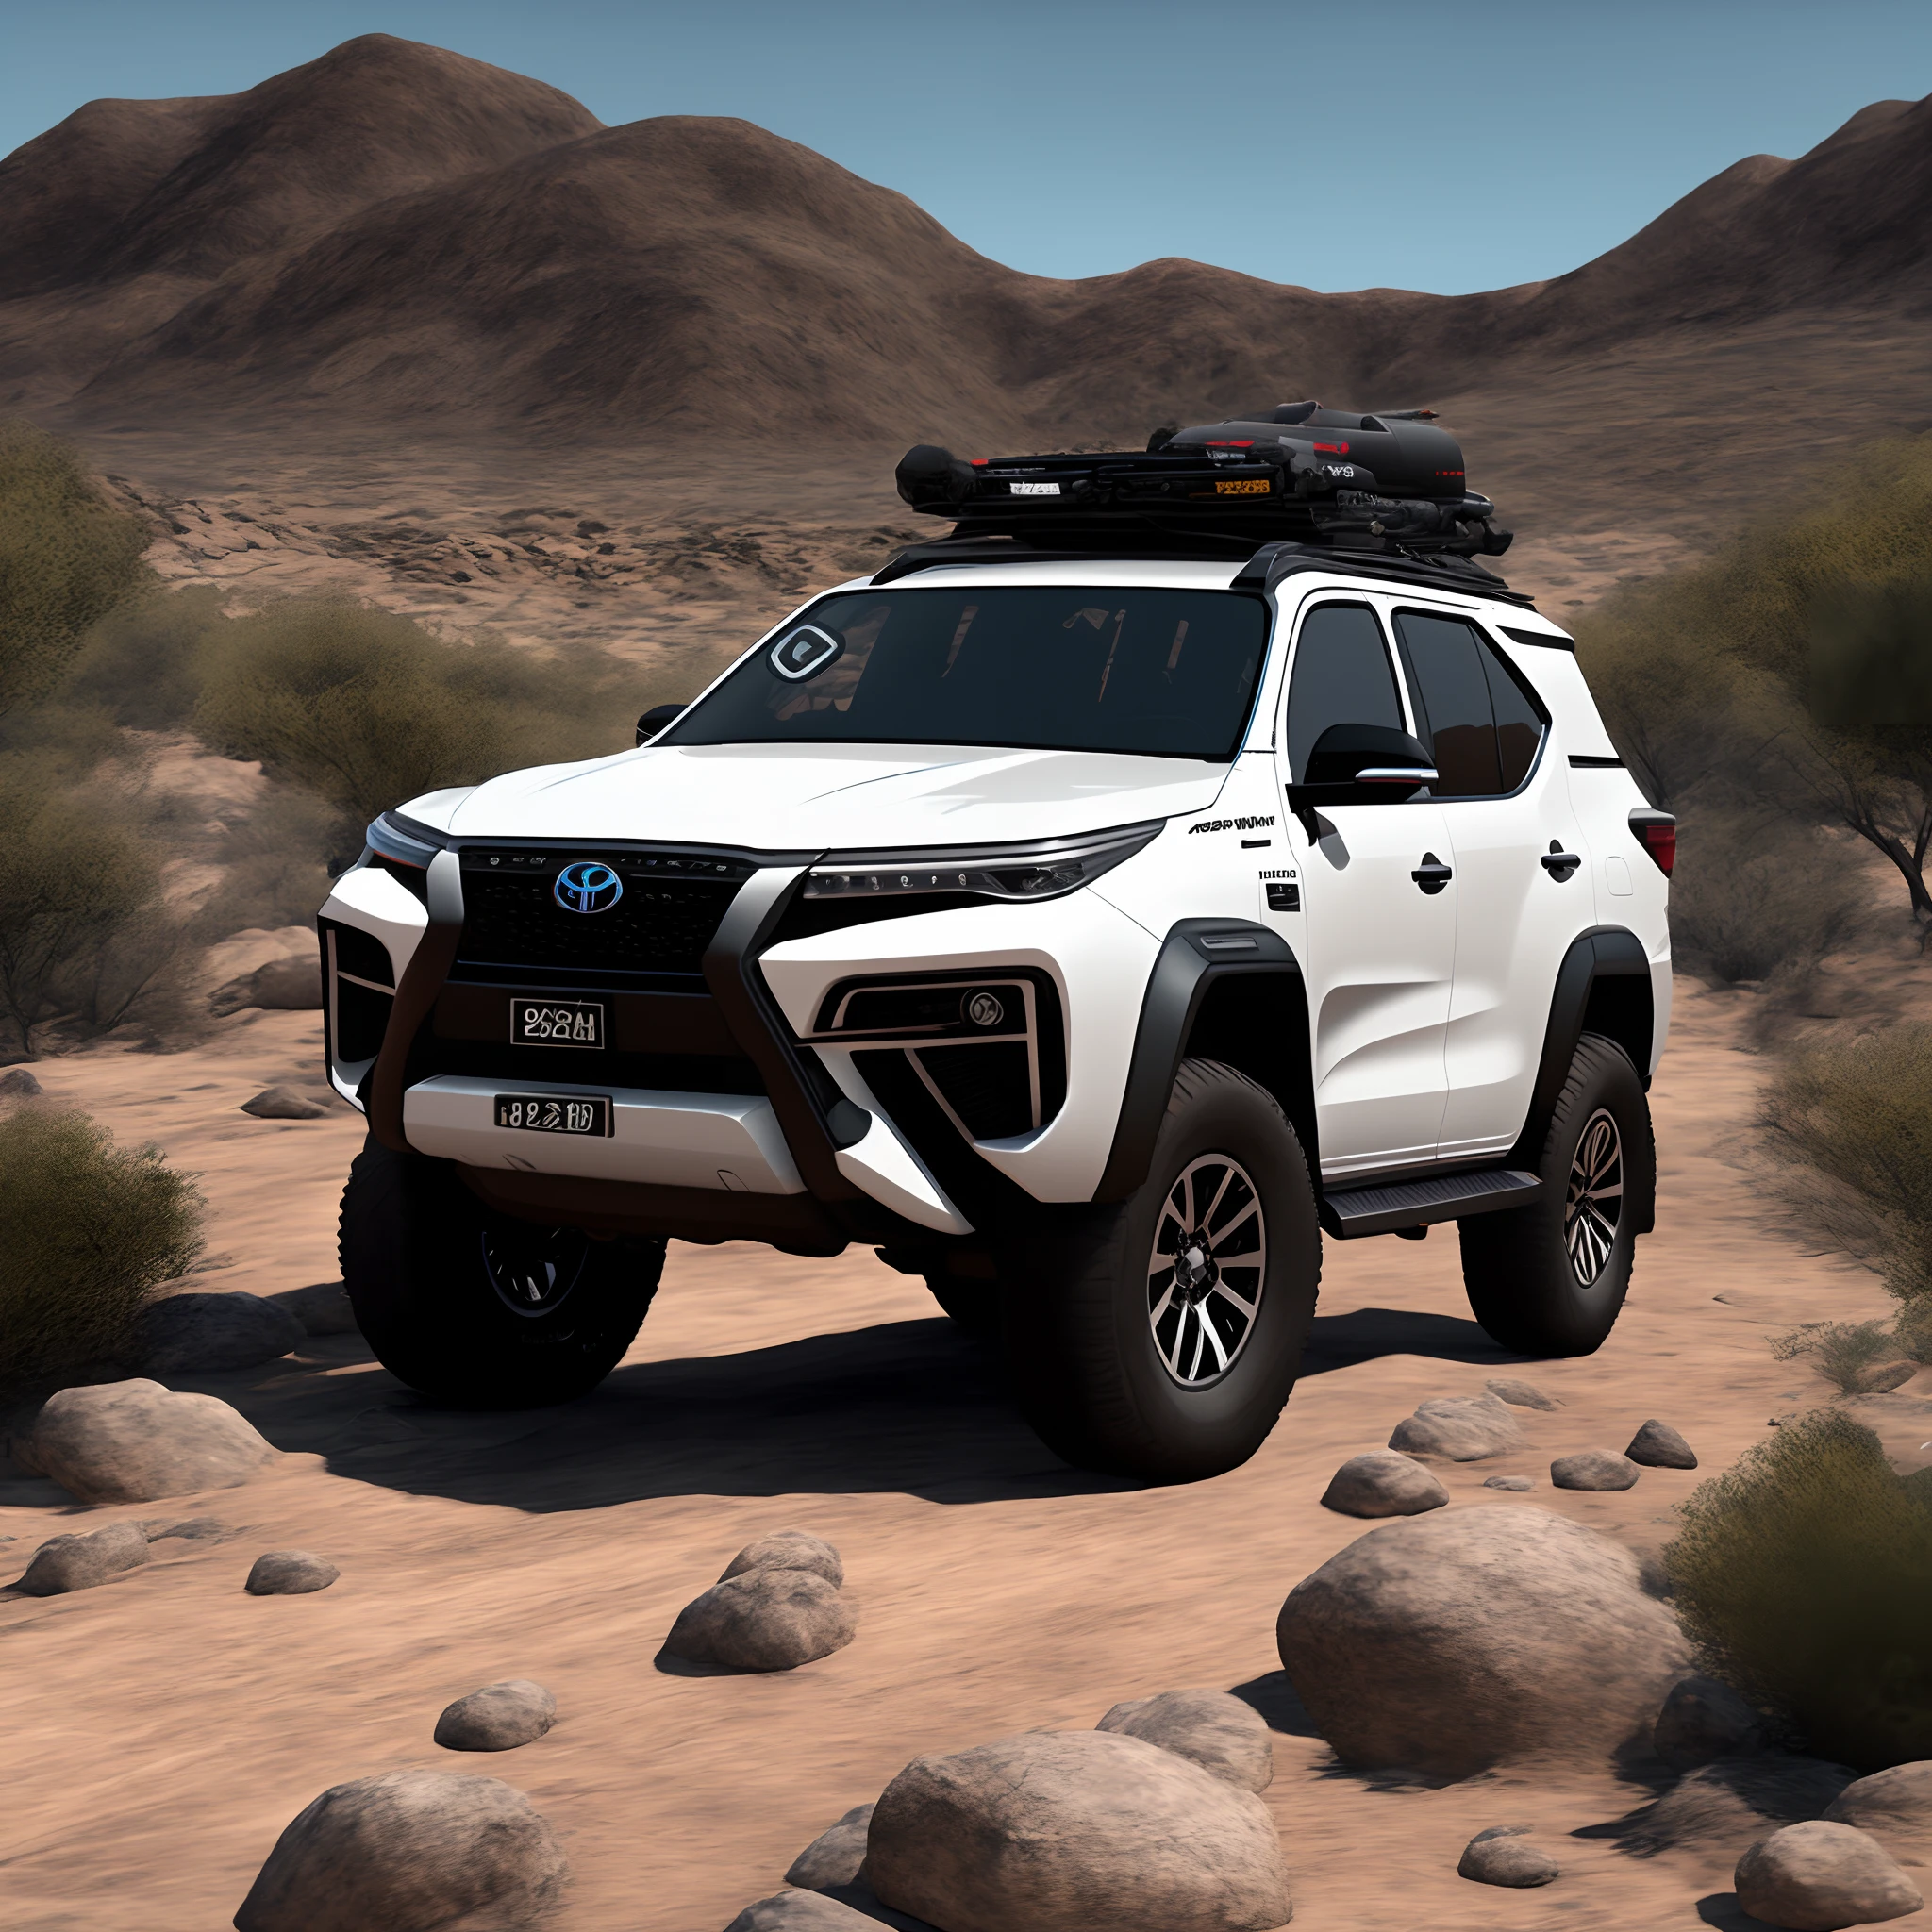 Generate an ultra-realistic 8K image of a fully customized 2023 white color Toyota Fortuner offroading in a breathtakingly lifelike environment.